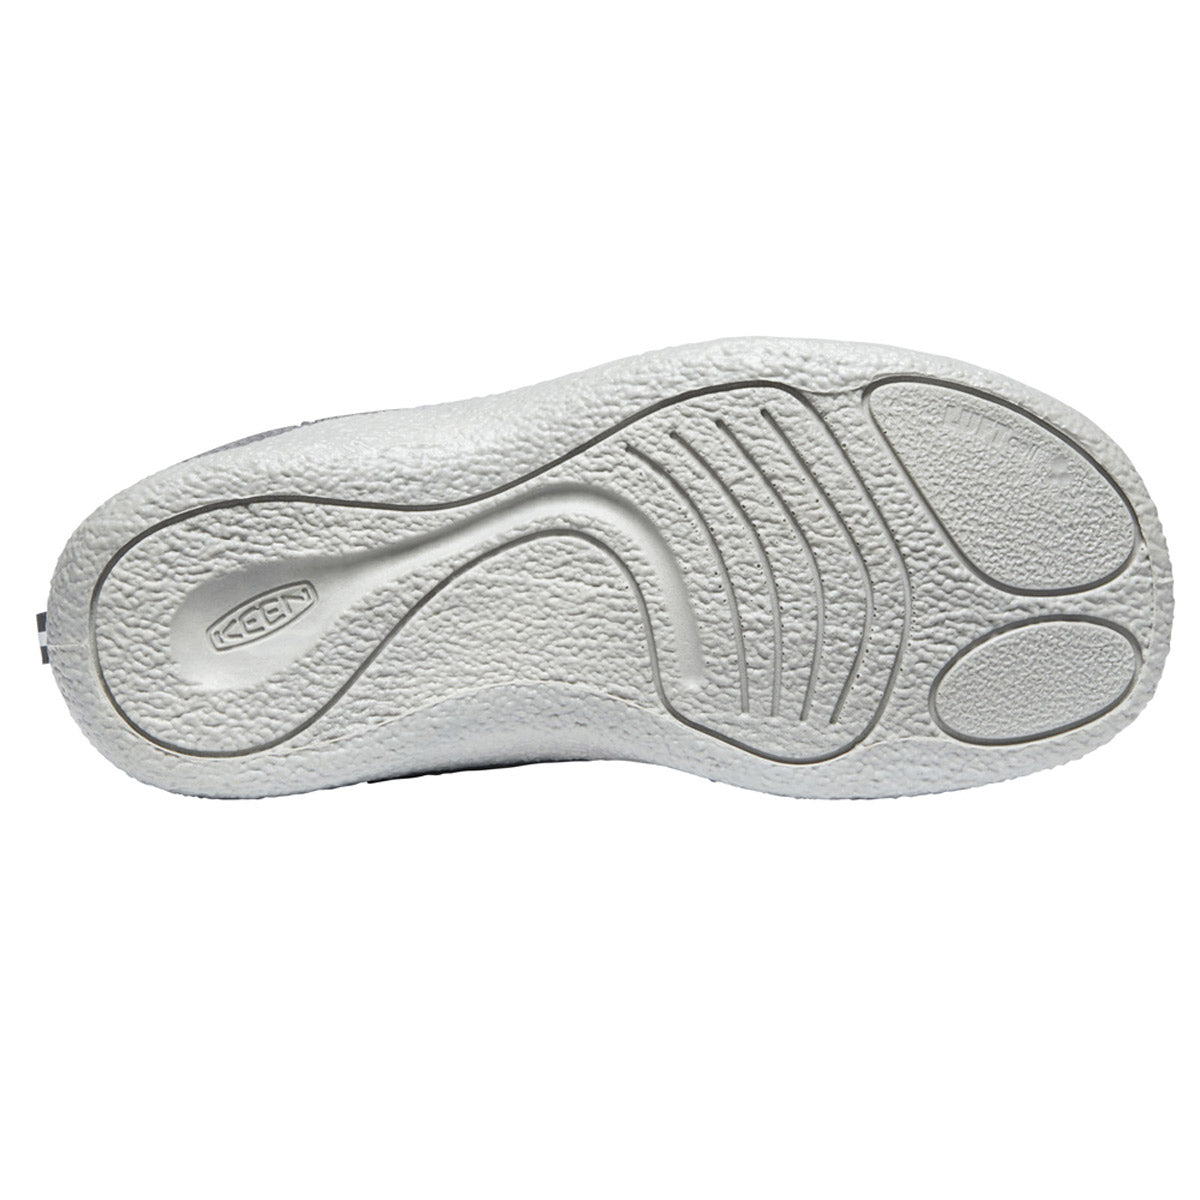 Sole of a KEEN HOWSER II CHILD STEEL GREY/WOOD VIOLET - KIDS shoe with textured tread design for Eco Anti-Odor grip.